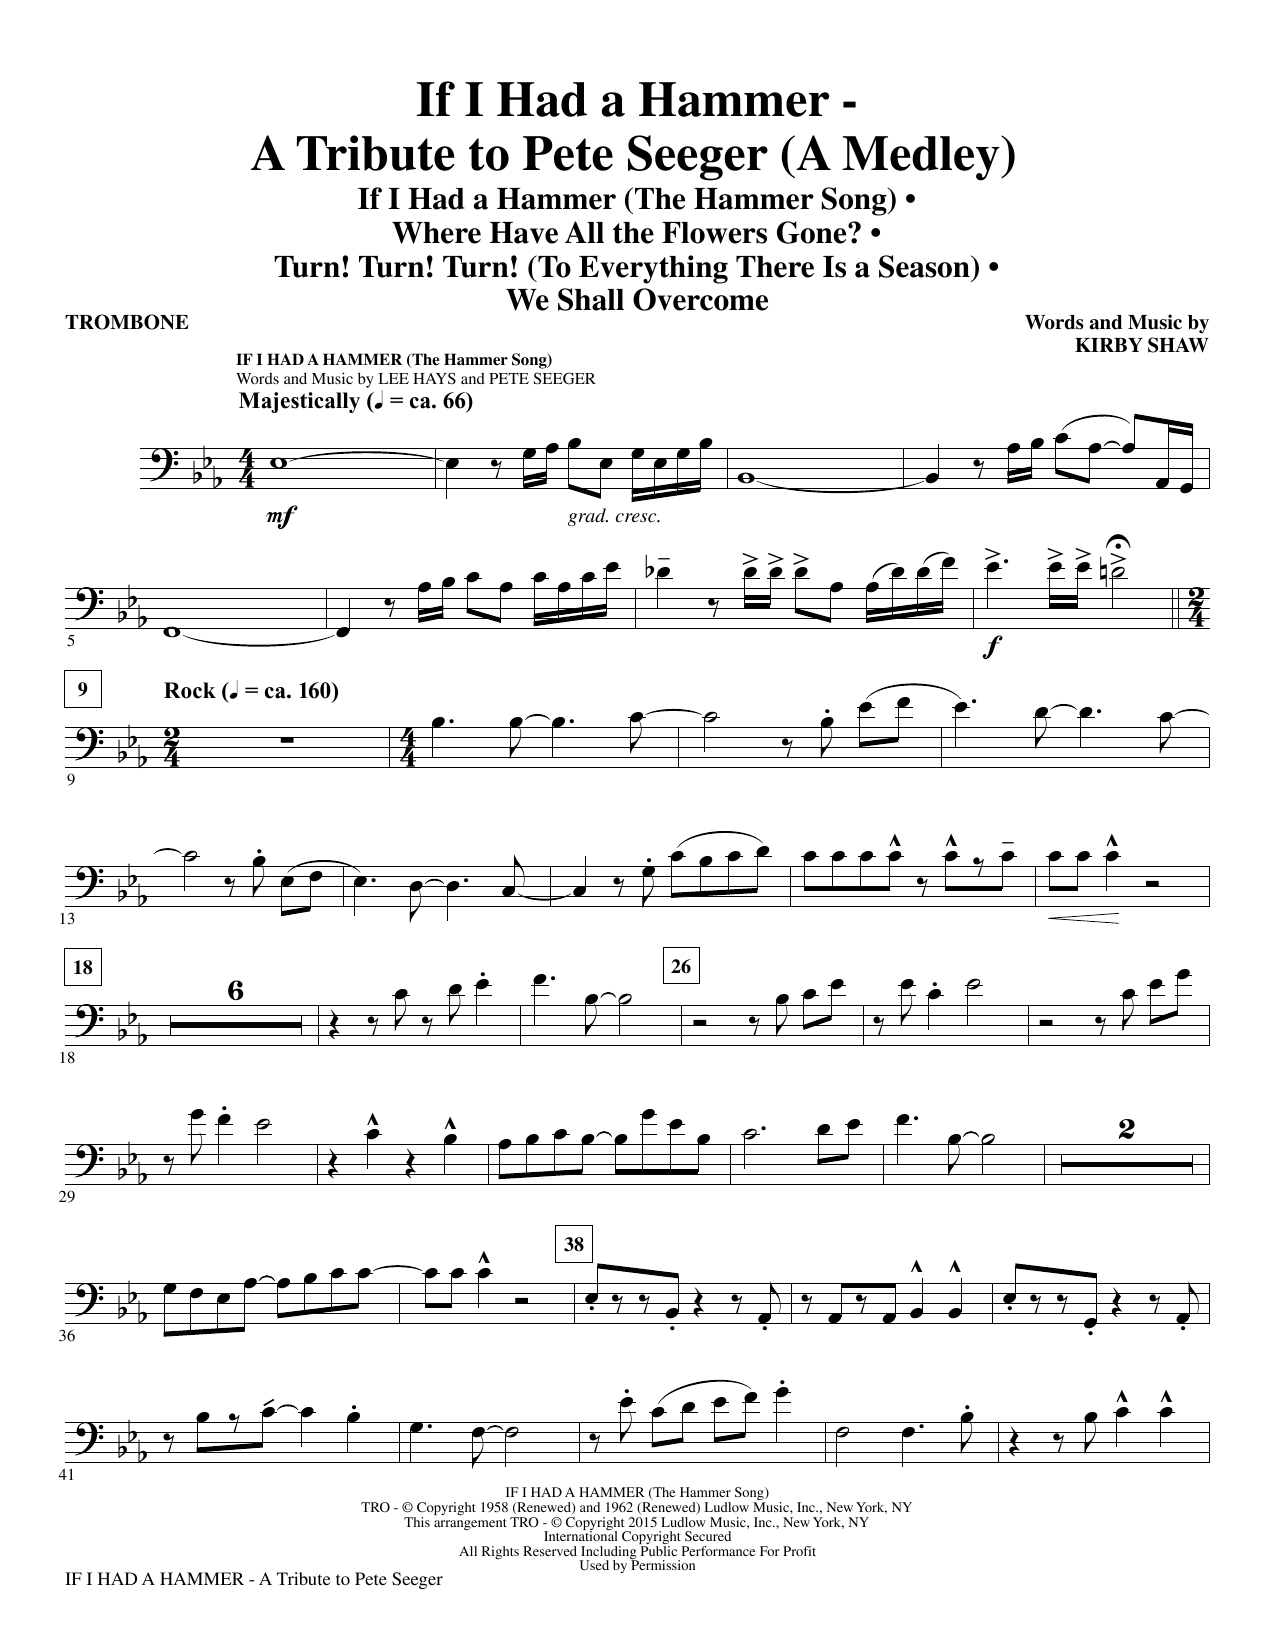 Kirby Shaw If I Had A Hammer - A Tribute to Pete Seeger - Trombone sheet music notes and chords. Download Printable PDF.